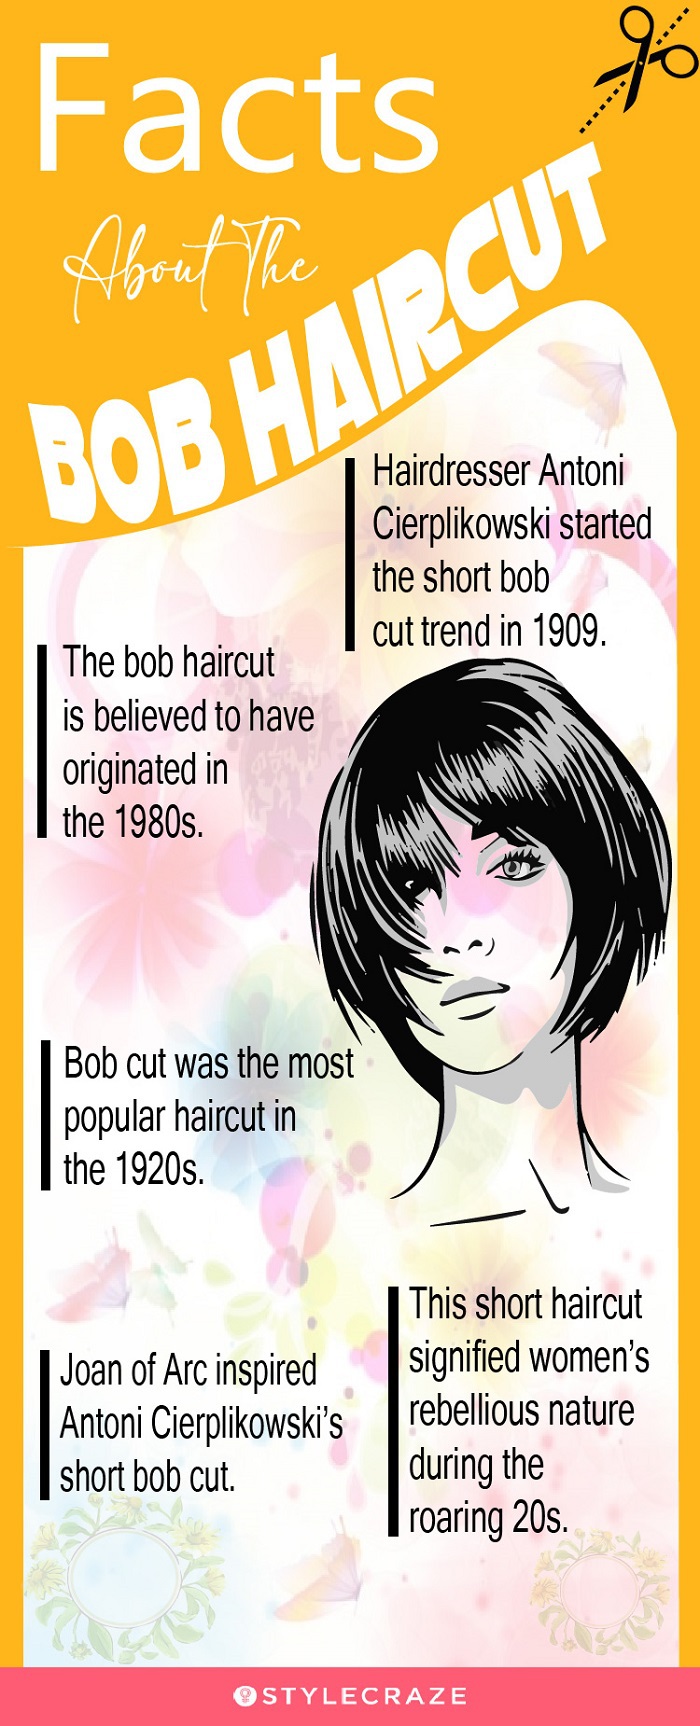 amazing facts about the bob haircut (infographic)